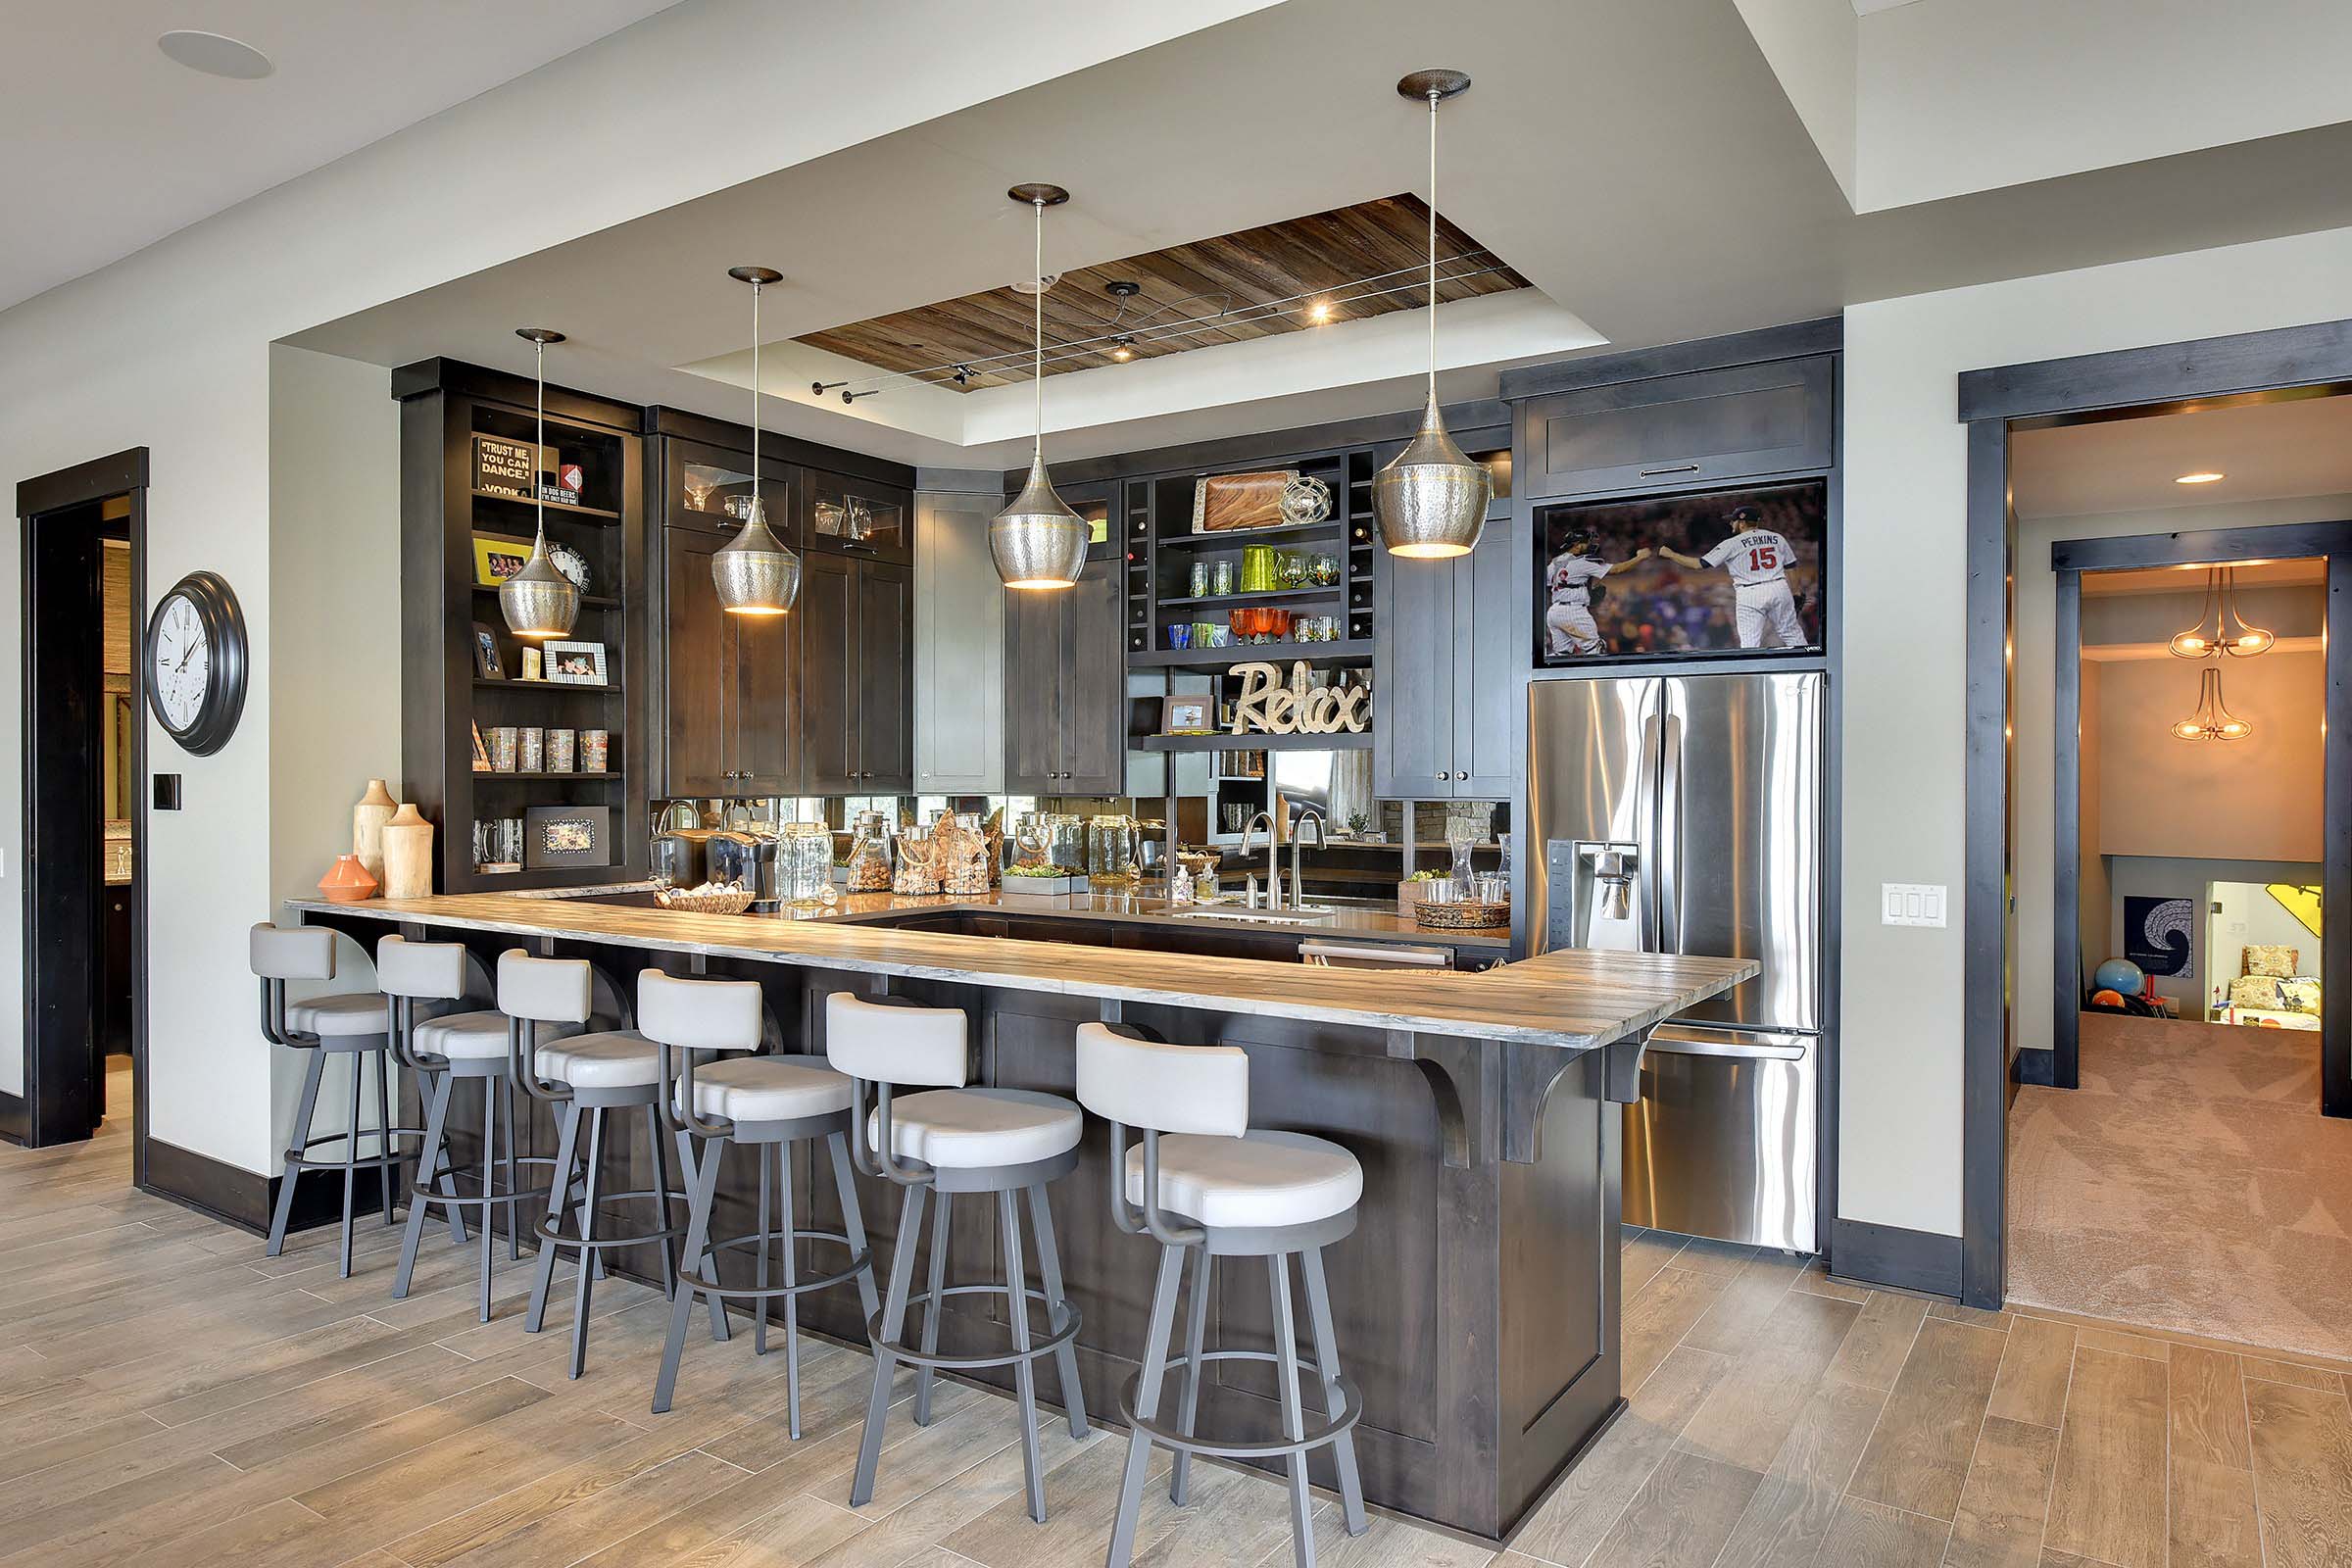 A home bar with stools and a television, featured in our Kitchens portfolio.